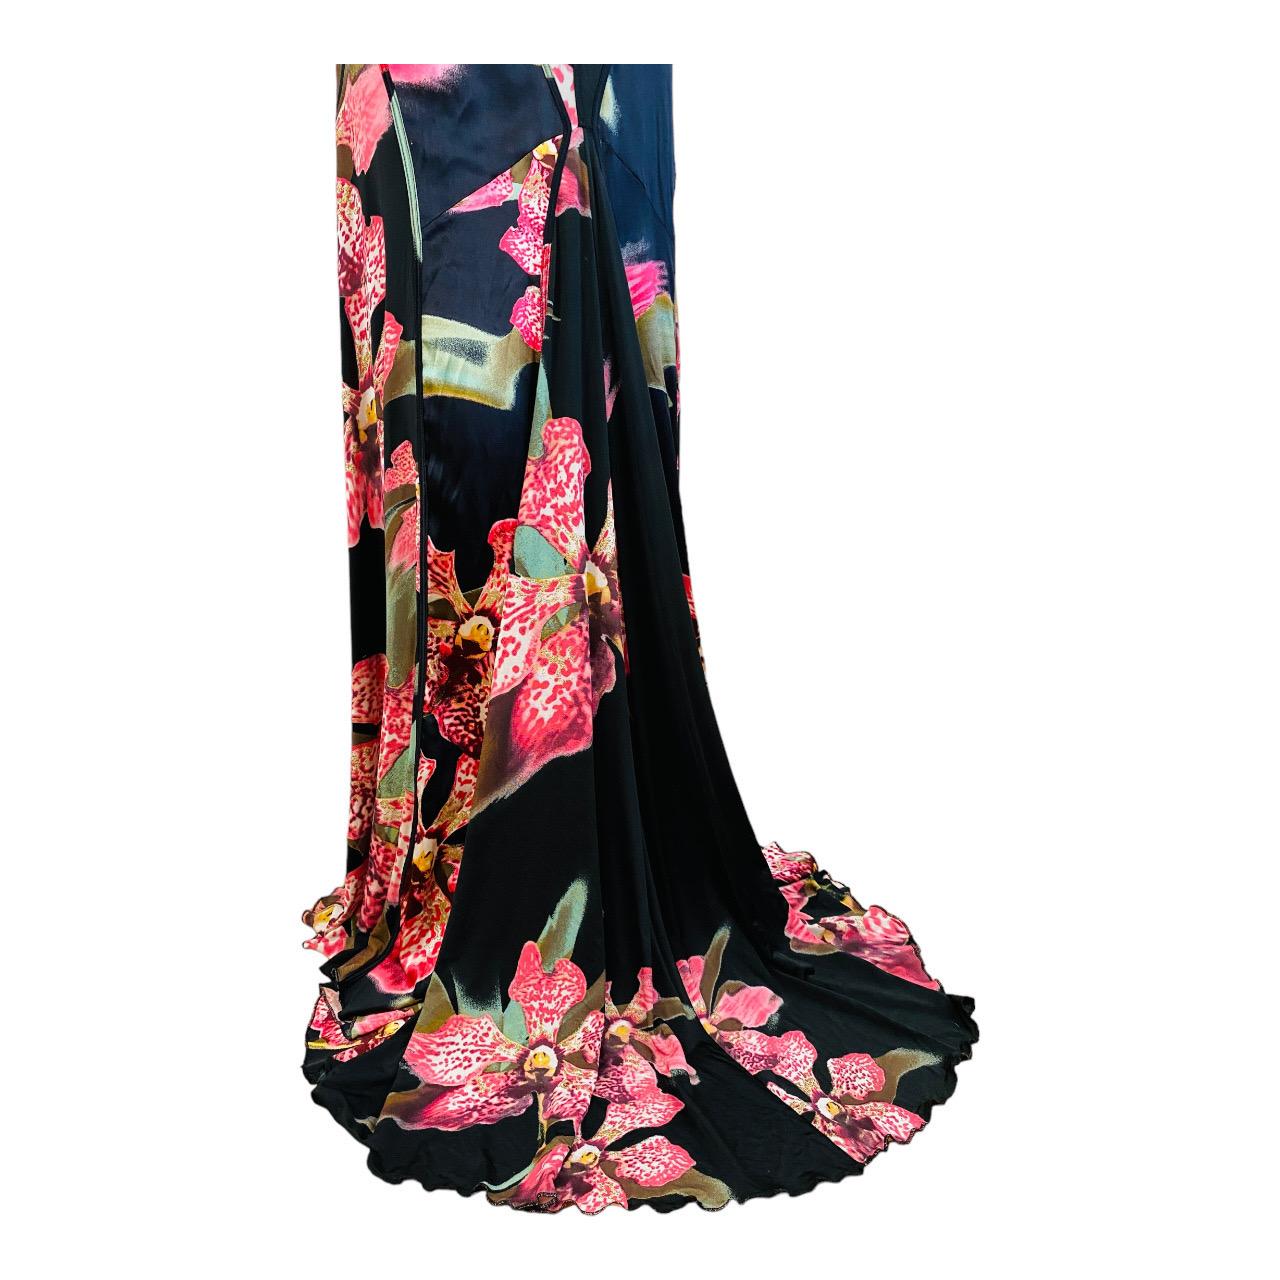 Vintage Roberto Cavalli F/W 2004 Floral Orchid Print Pink + Black Dress Gown For Sale 8